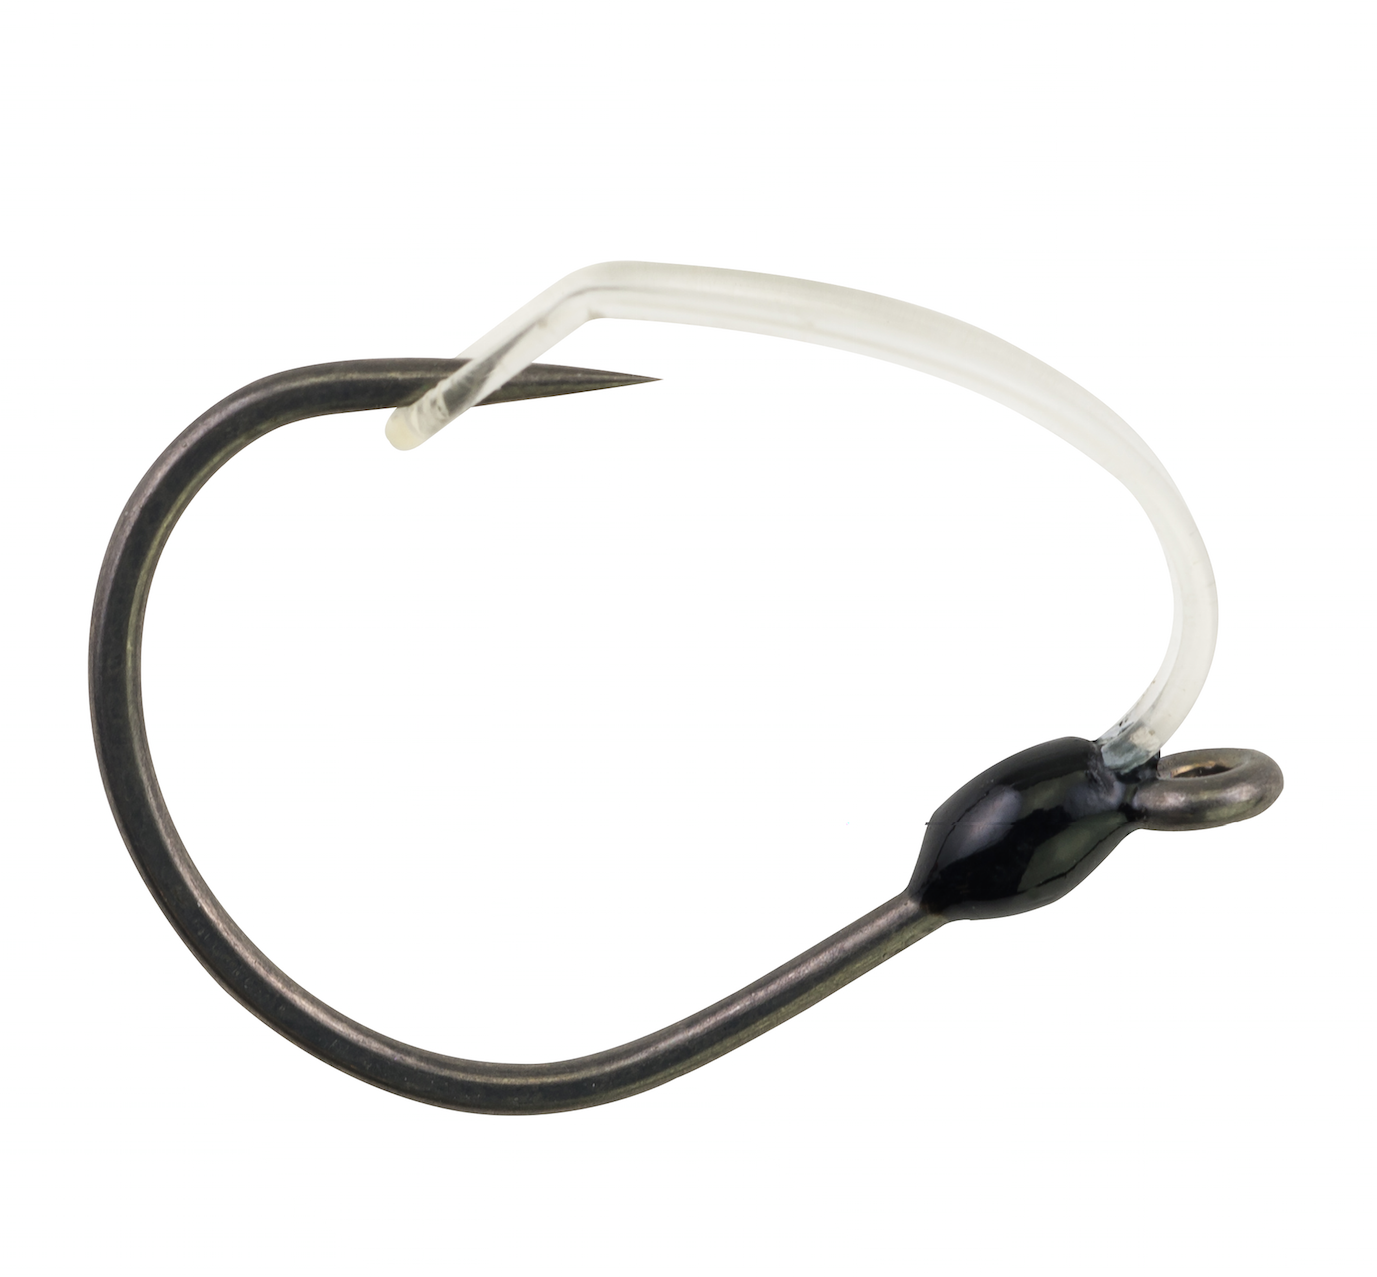 Available in sizes from #1 to 3/0, the Weedless WideGap hook feature a fluorocarbon weed guard to pitch your bait into dense cover without getting snagged up. This is a great hook for wacky rigging. Five hooks come in each package for $5.99